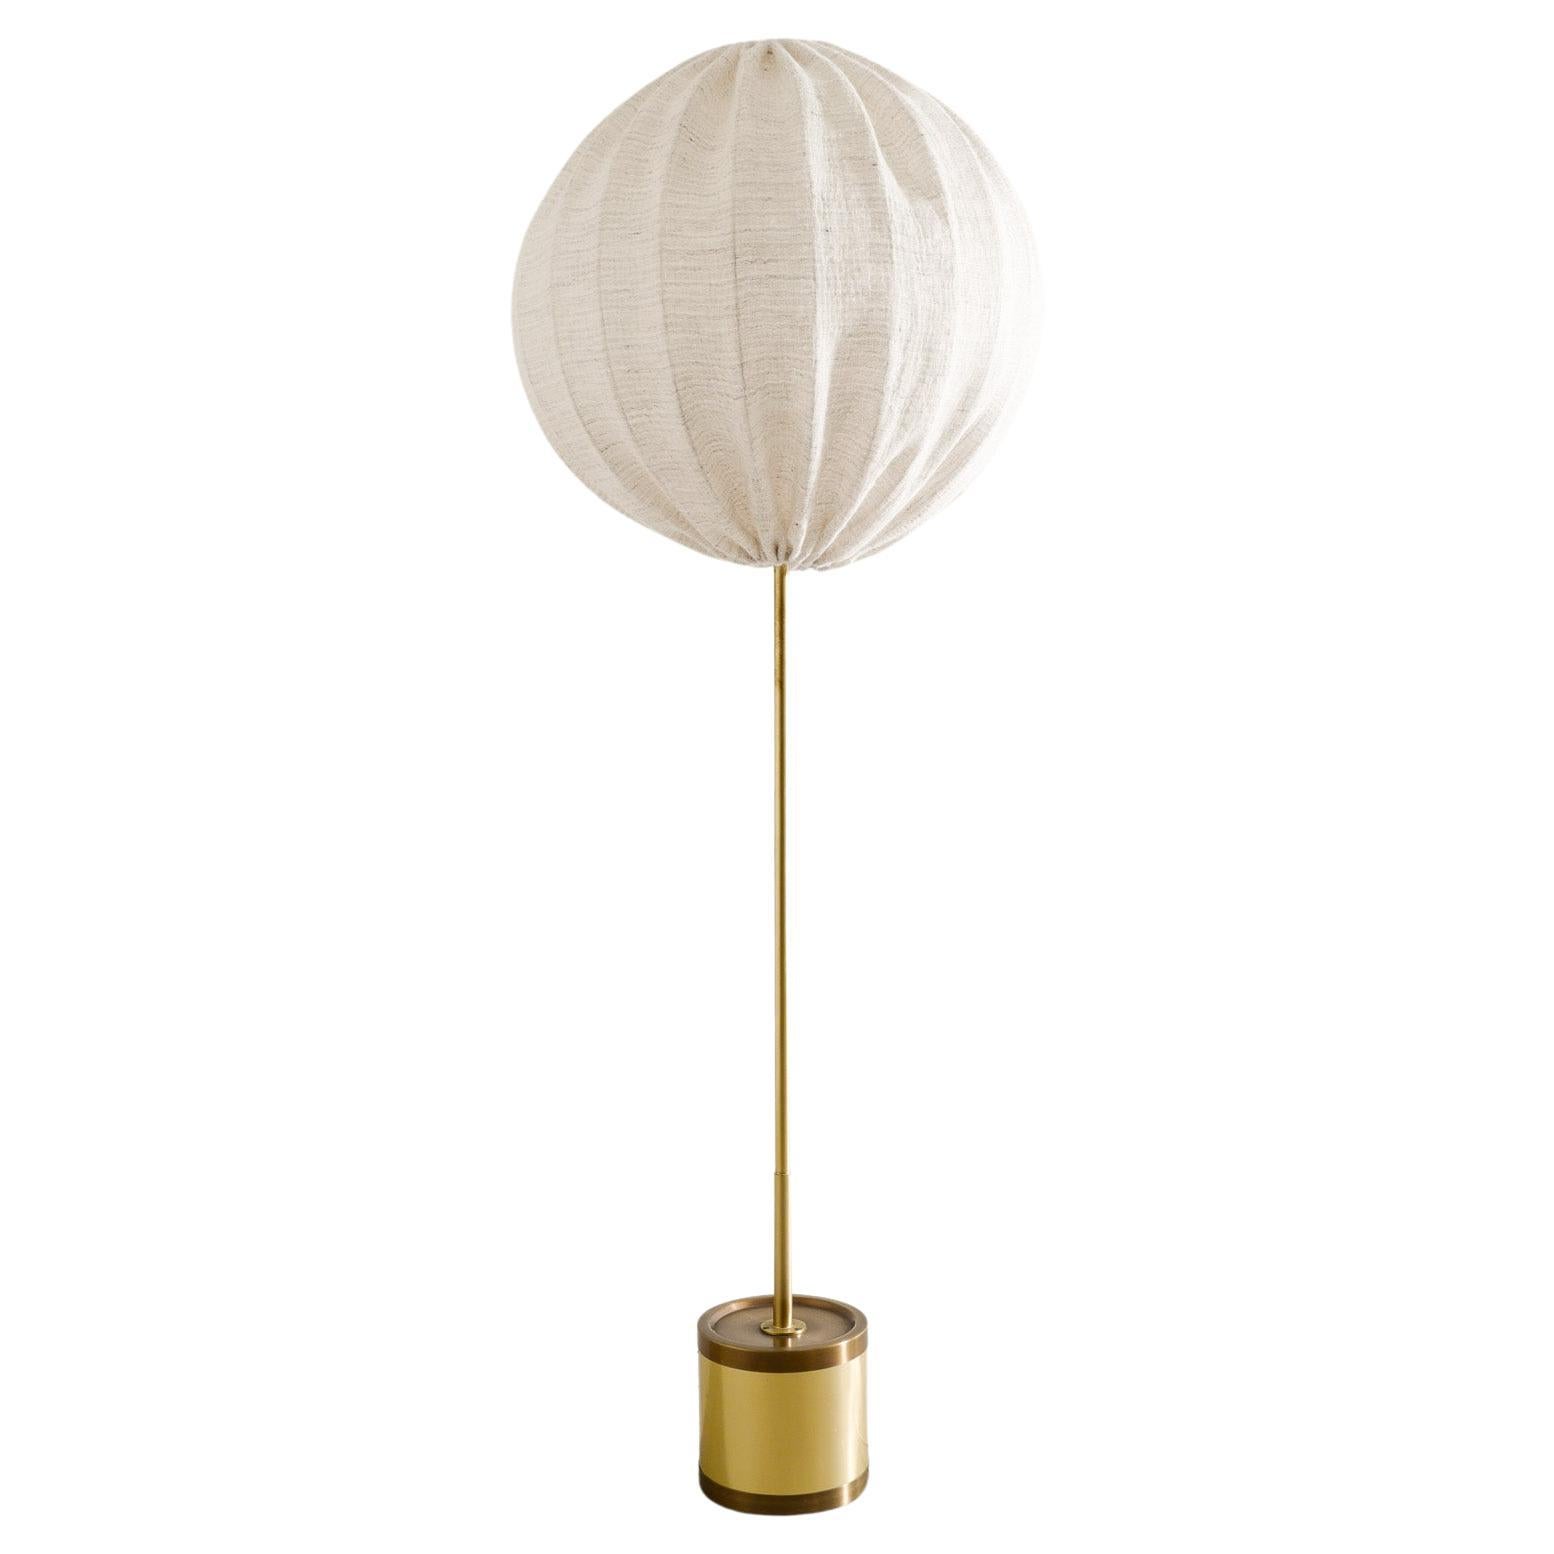 Hans-Agne Jakobsson G-123 Floor Lamp in Brass & Fabric Produced in Sweden, 1950s For Sale